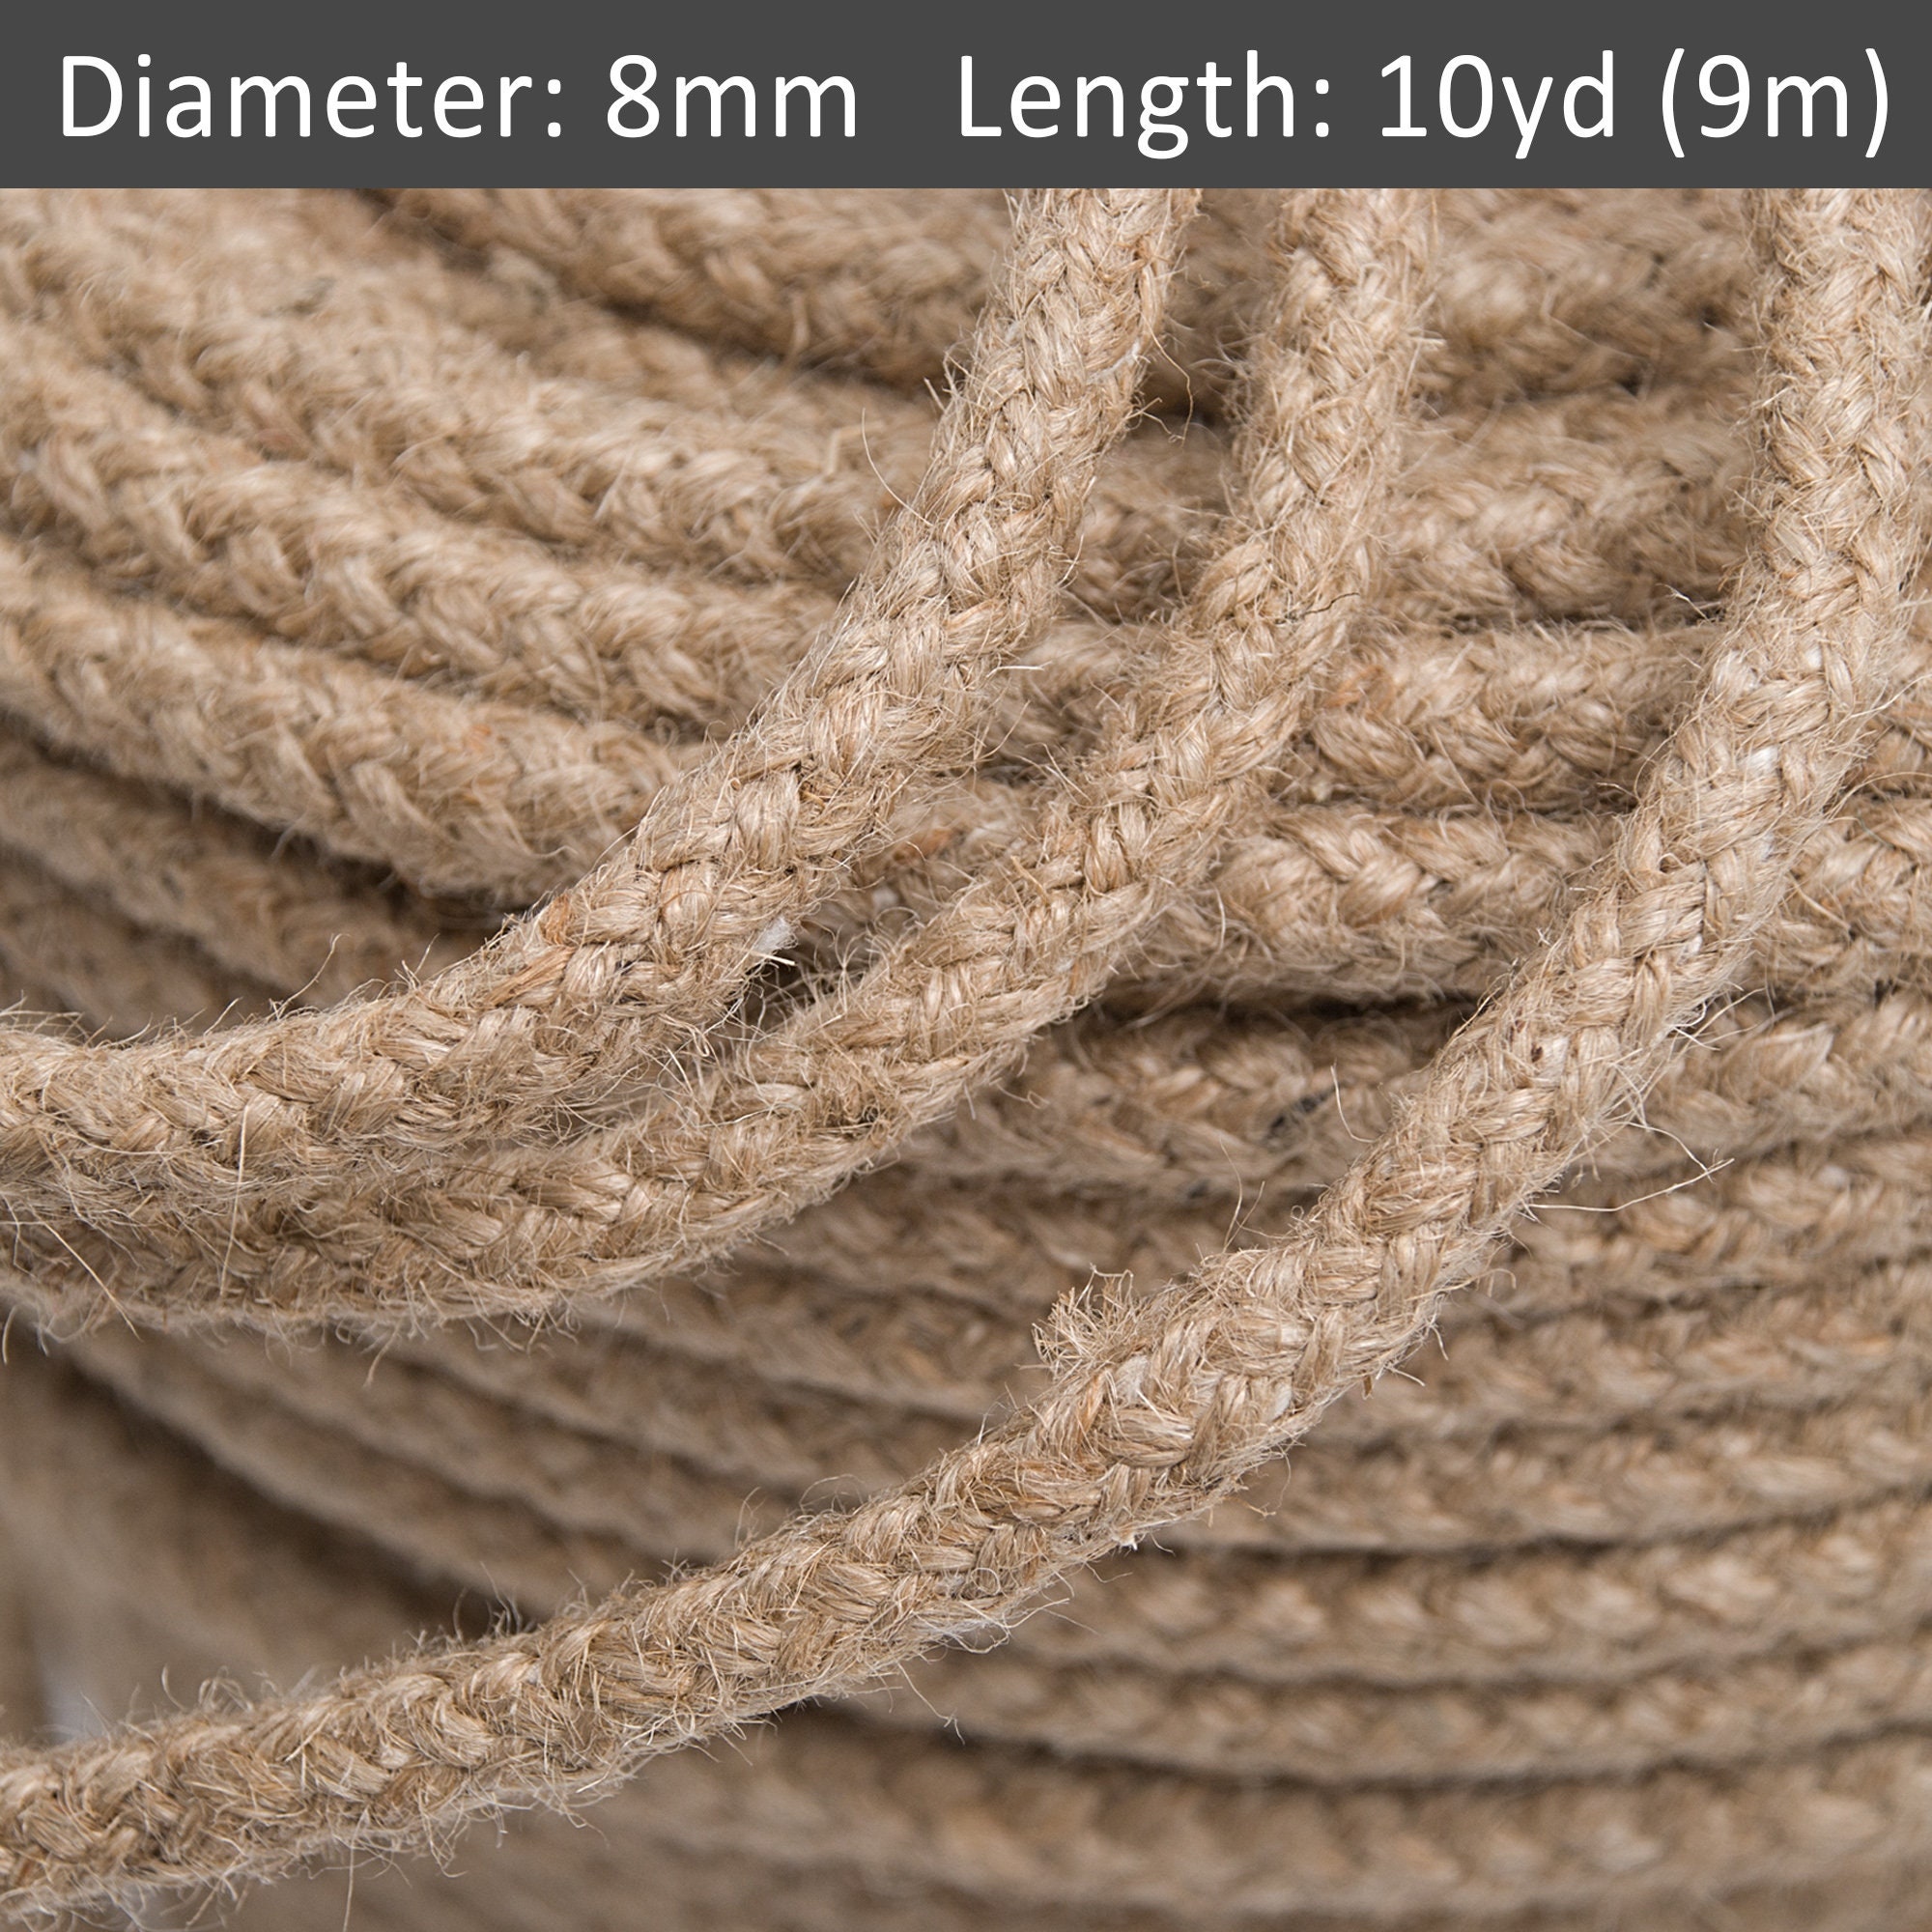 Linen Jute Twine Eco-Friendly Strong Natural Jute String Rope 6mm x 20m  (1/4 Inch x 65 Feet)